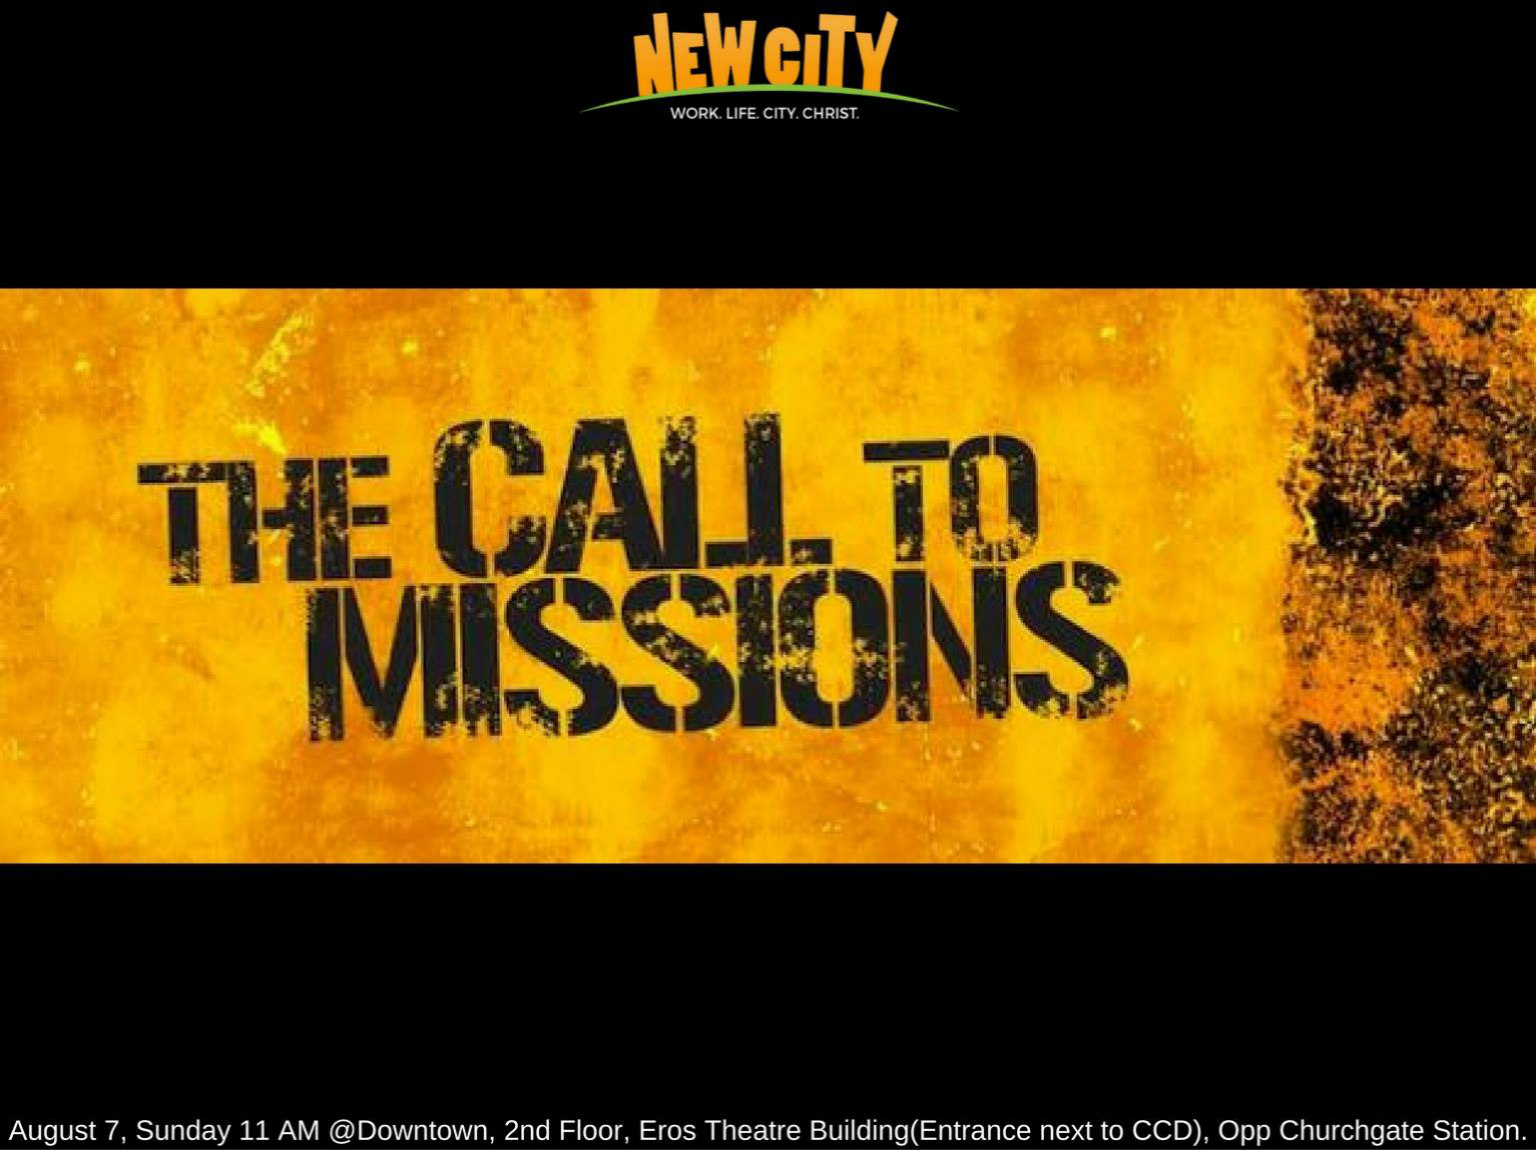 The Call to Mission